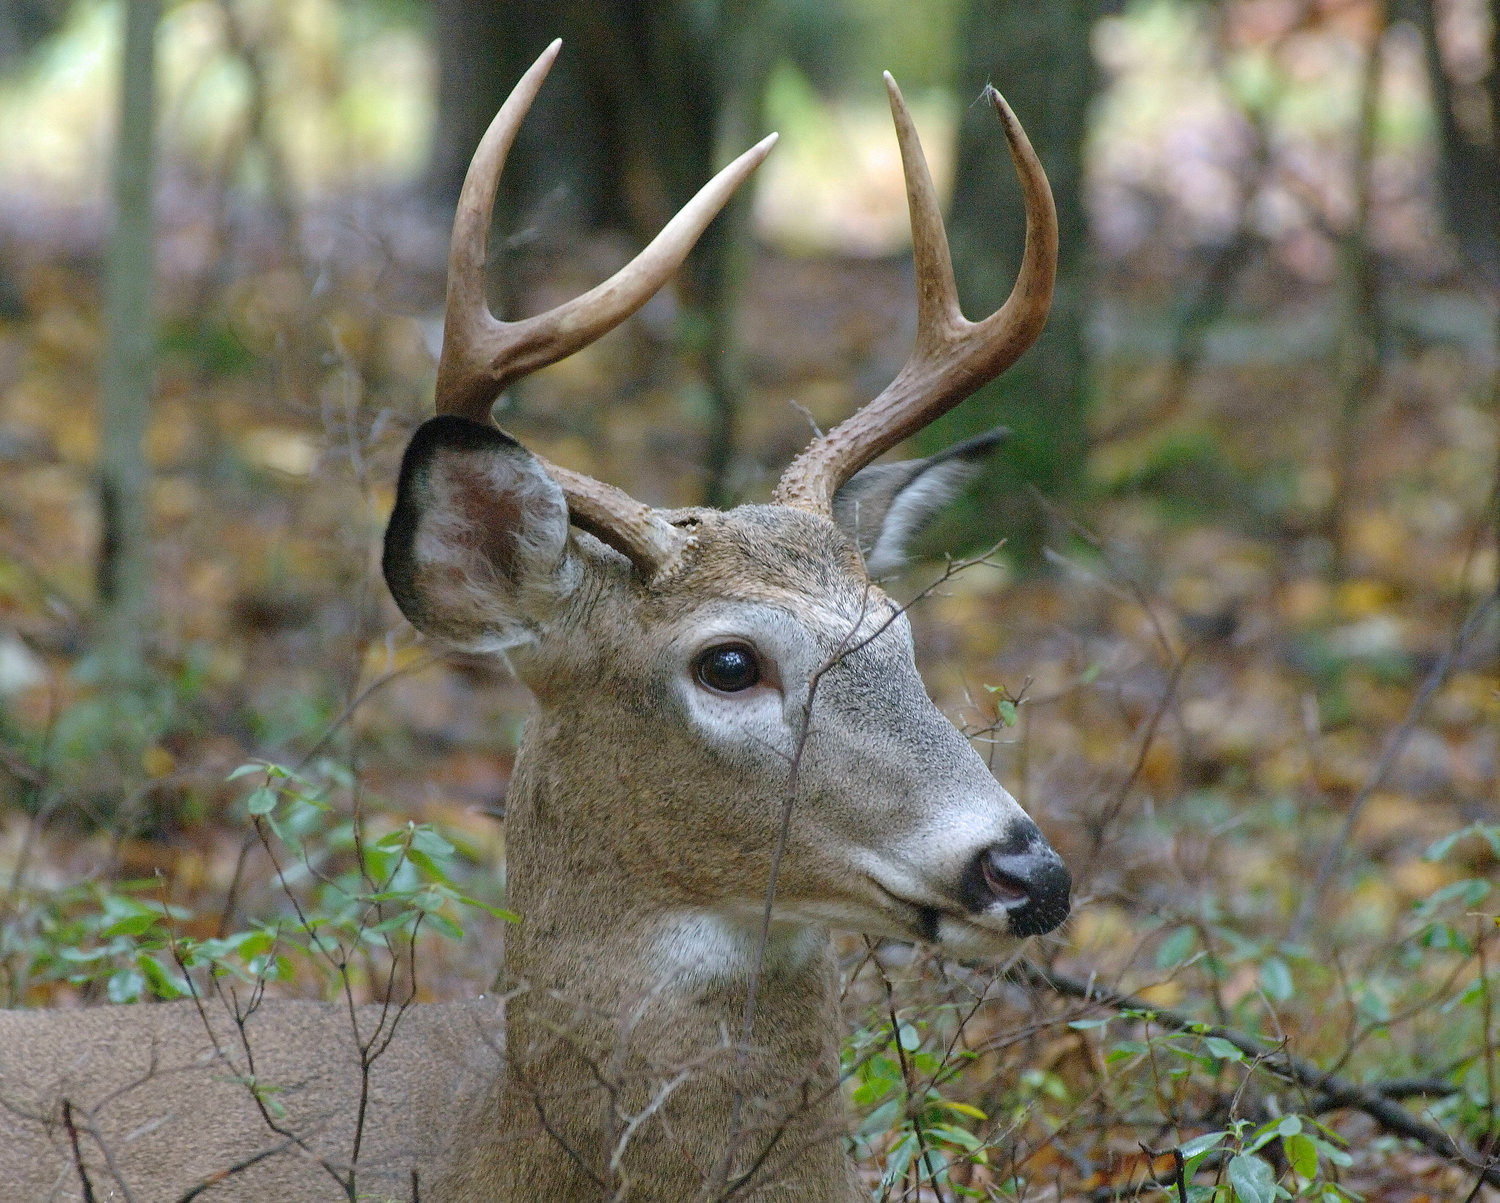 This is a typical male deer (buck) taken during the fall. The antlers no longer have velvet, which they had during the summer. Though much of the roadside brush has lost its foliage, the winter coat of deer is brown. This reduces visibility for drivers, due to deer blending into the background of leaves, common in many areas.